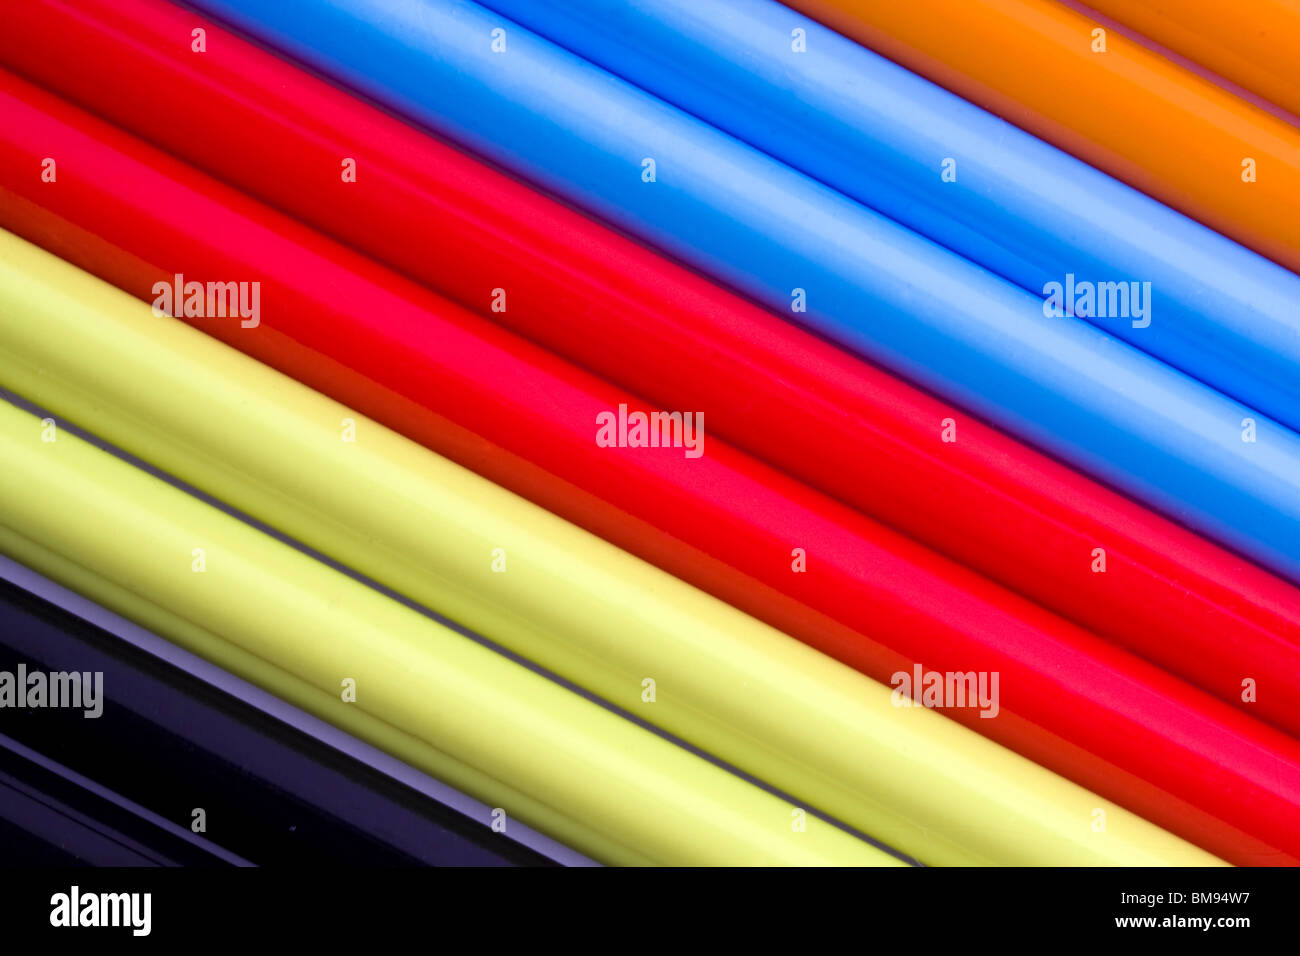 striped colored background Stock Photo